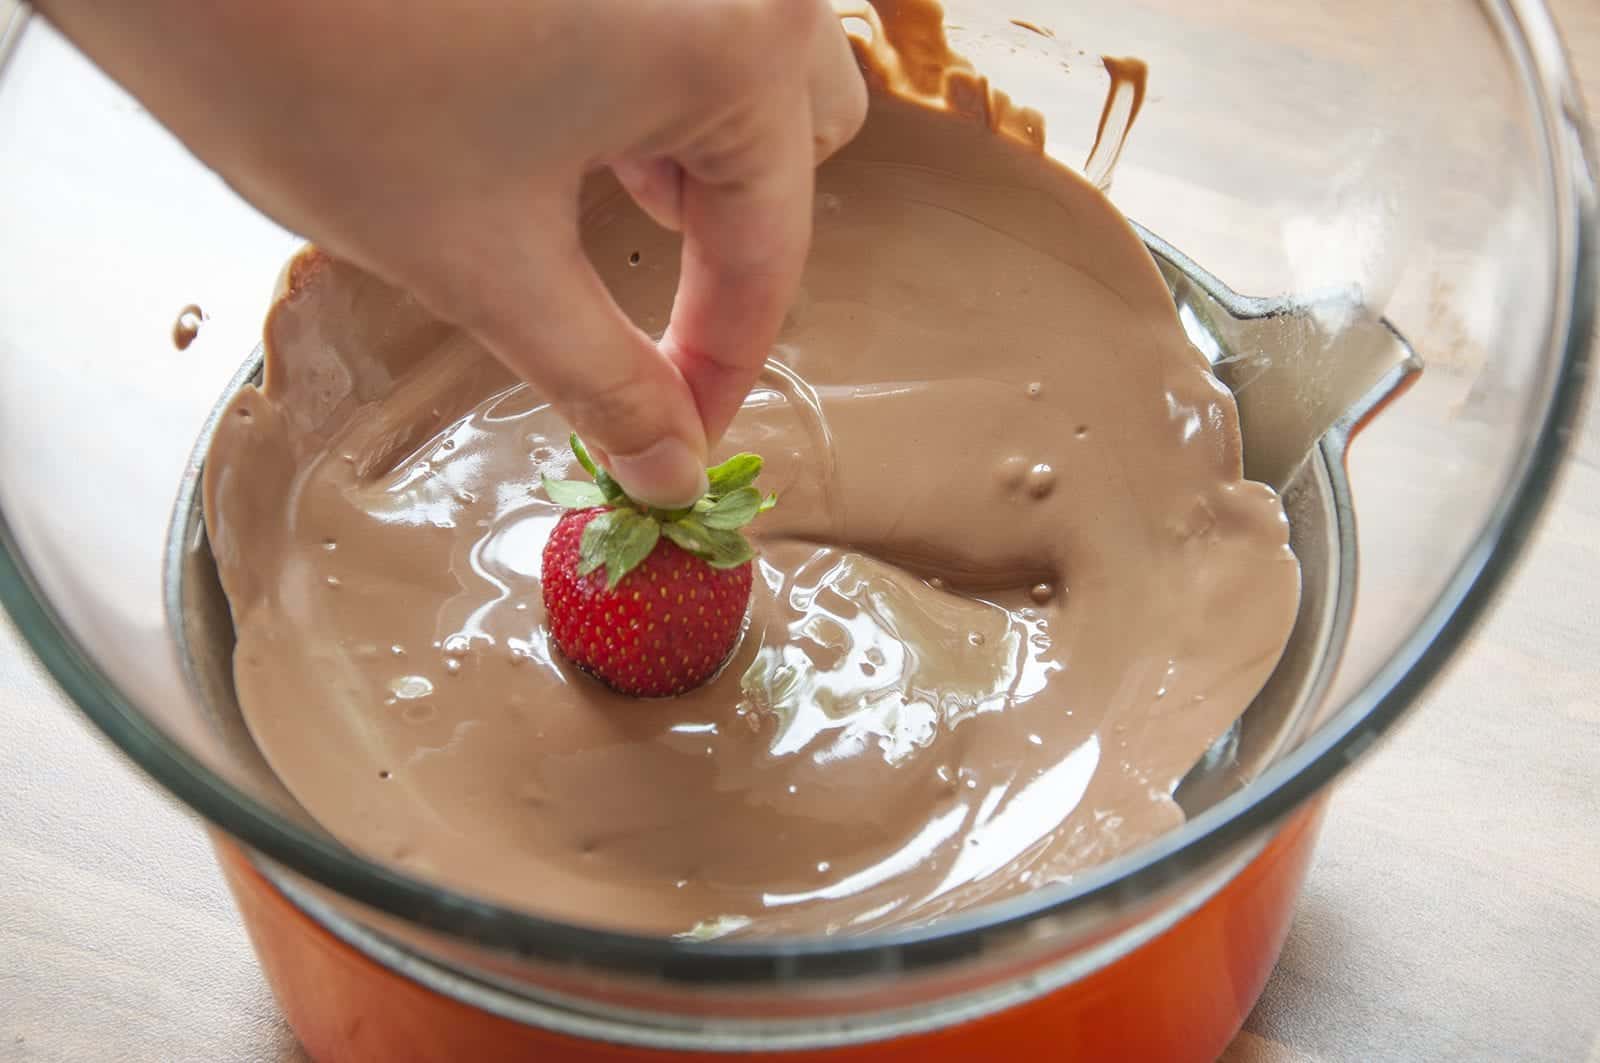 Hazelnut and chocolate smothered strawberries. Dip the strawberry in to the chocolate | https://theyumyumclub.com/2019/05/21/hazelnut-chocola…red-strawberries/